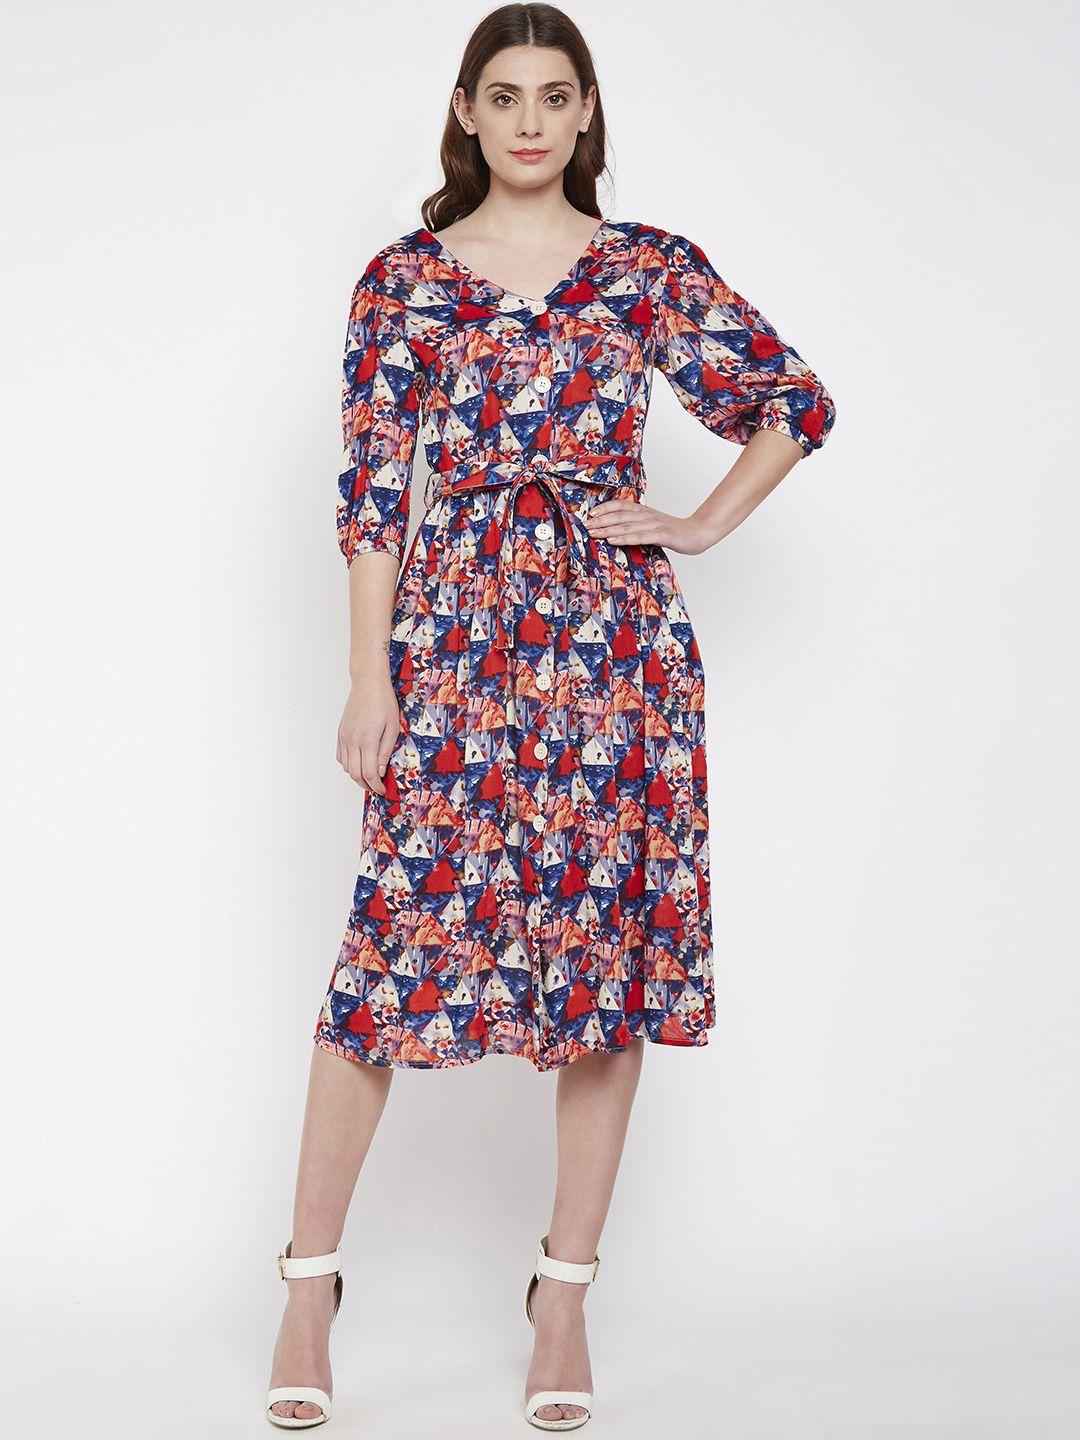 oxolloxo-women-multicoloured-printed-fit-and-flare-dress